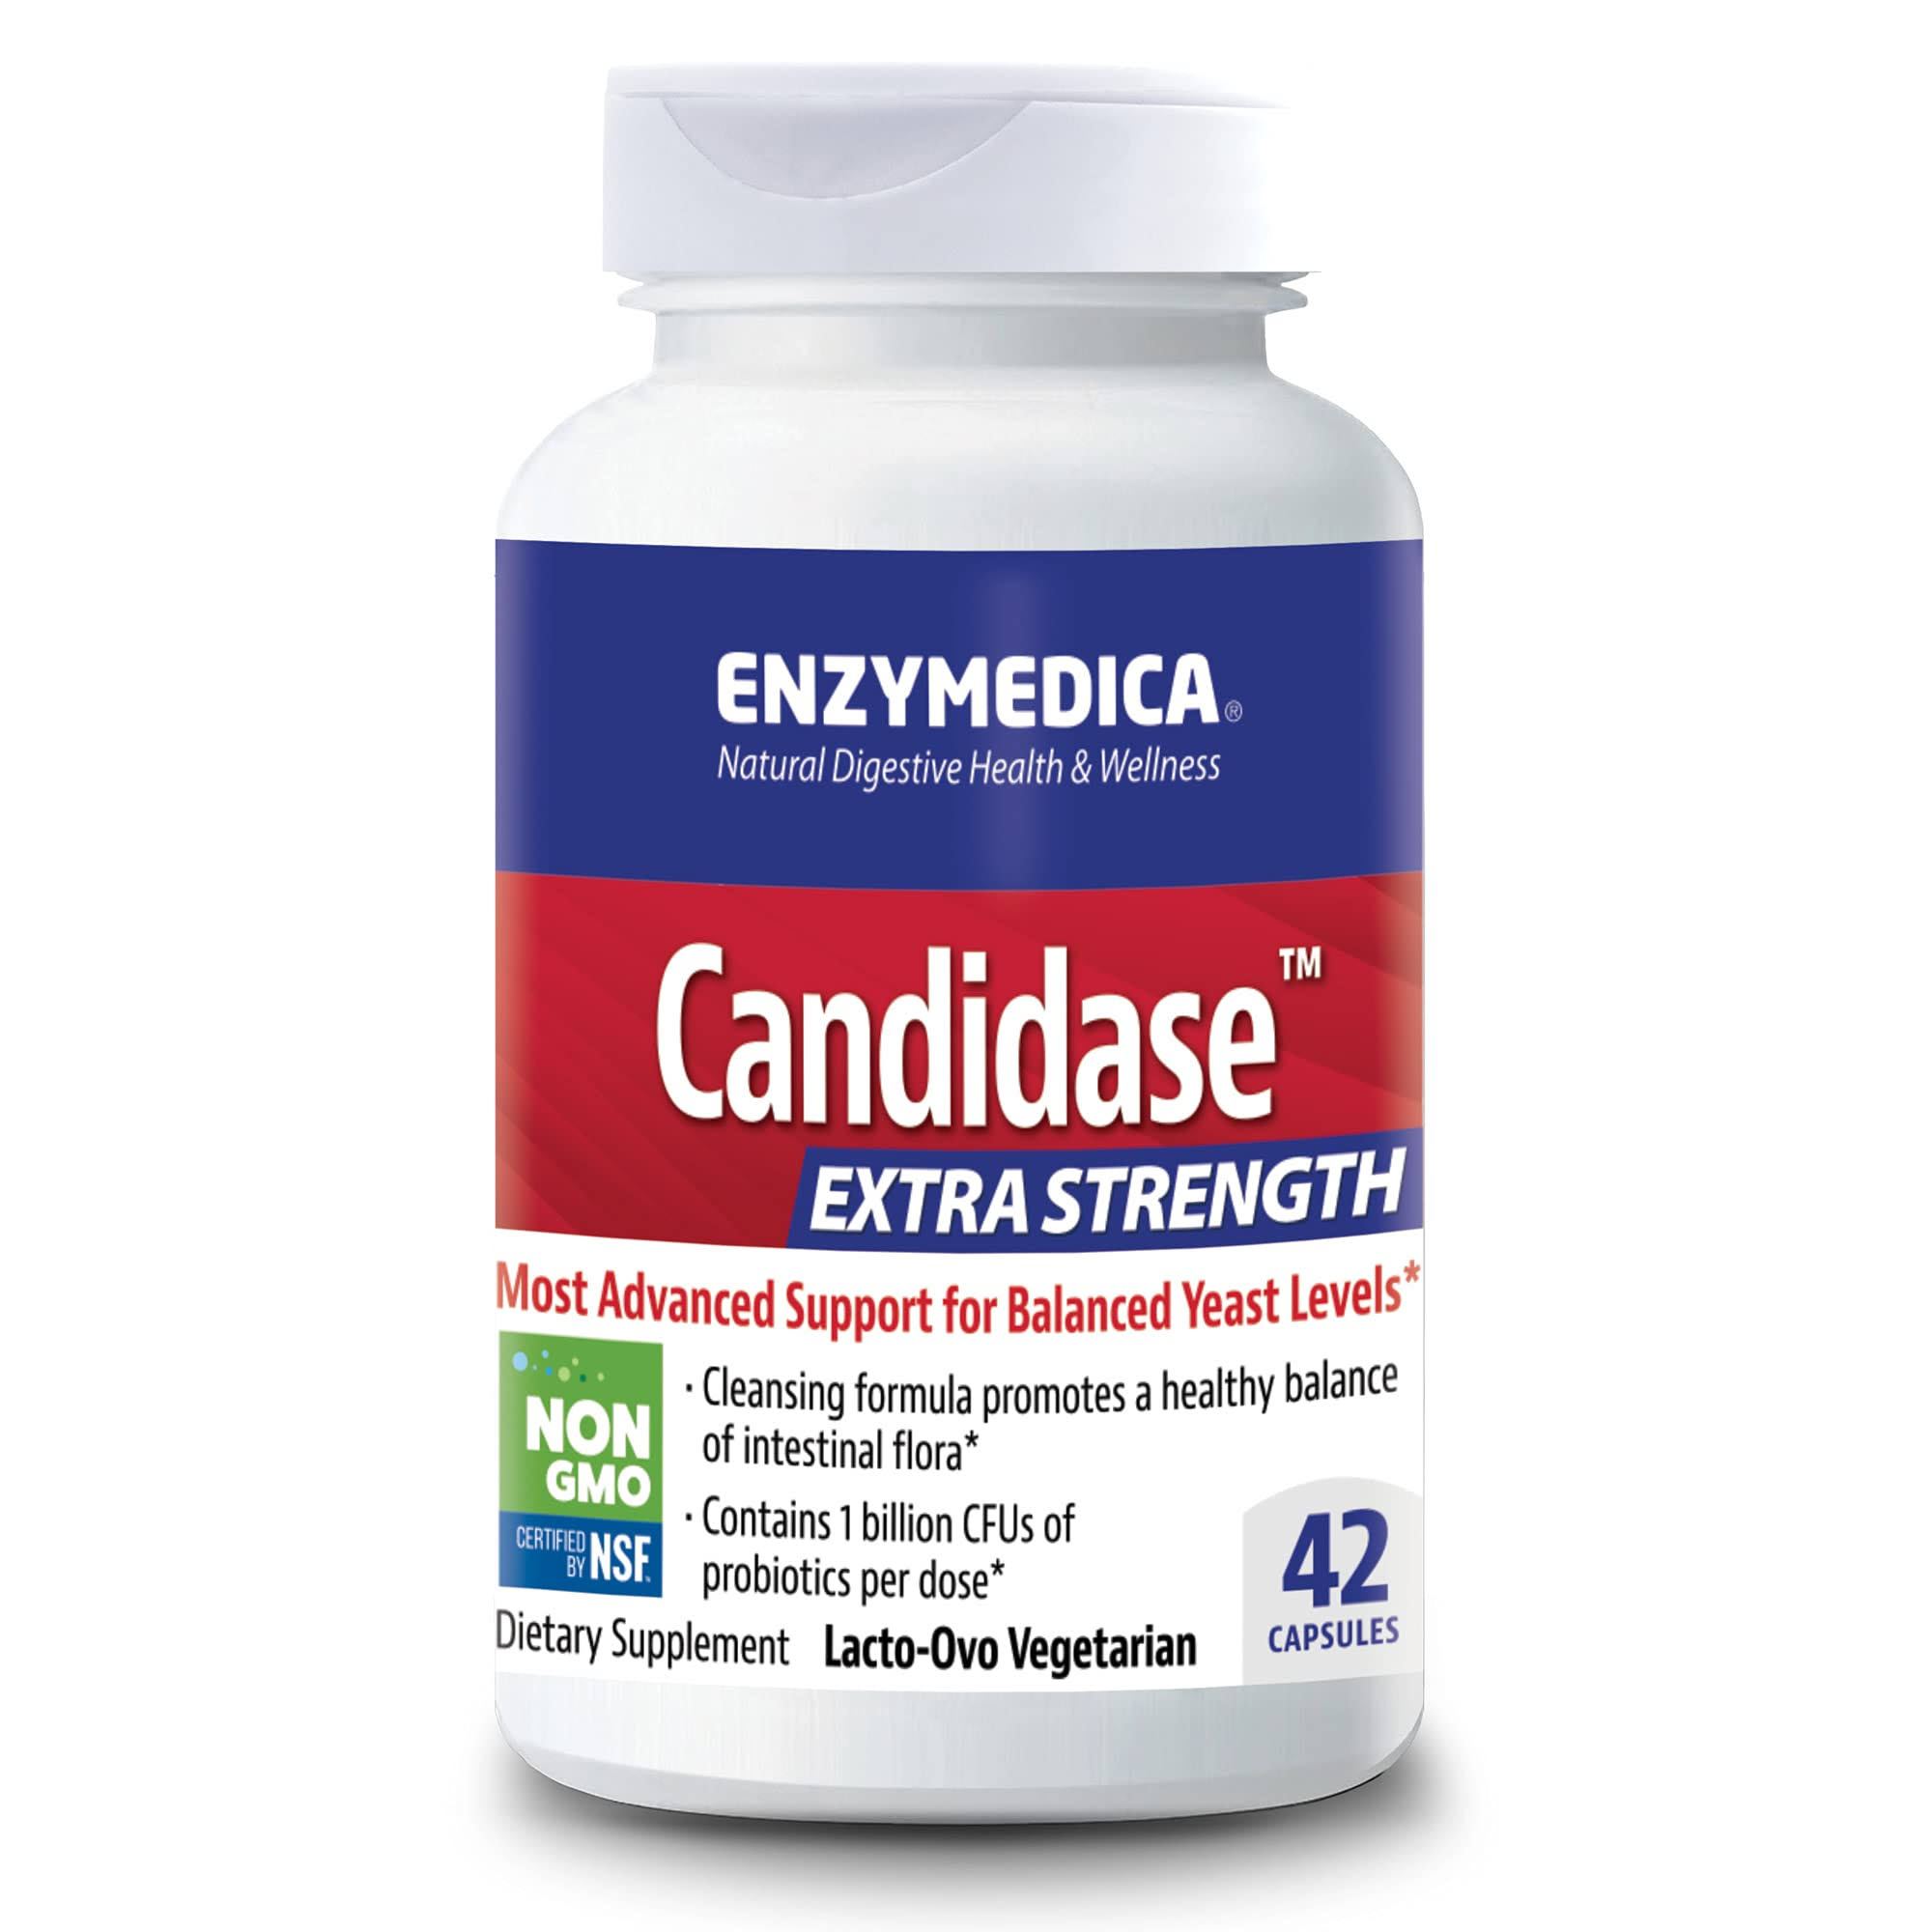 Enzymedica Candidase Dietary Supplement - Extra Strength, 42 Capsules